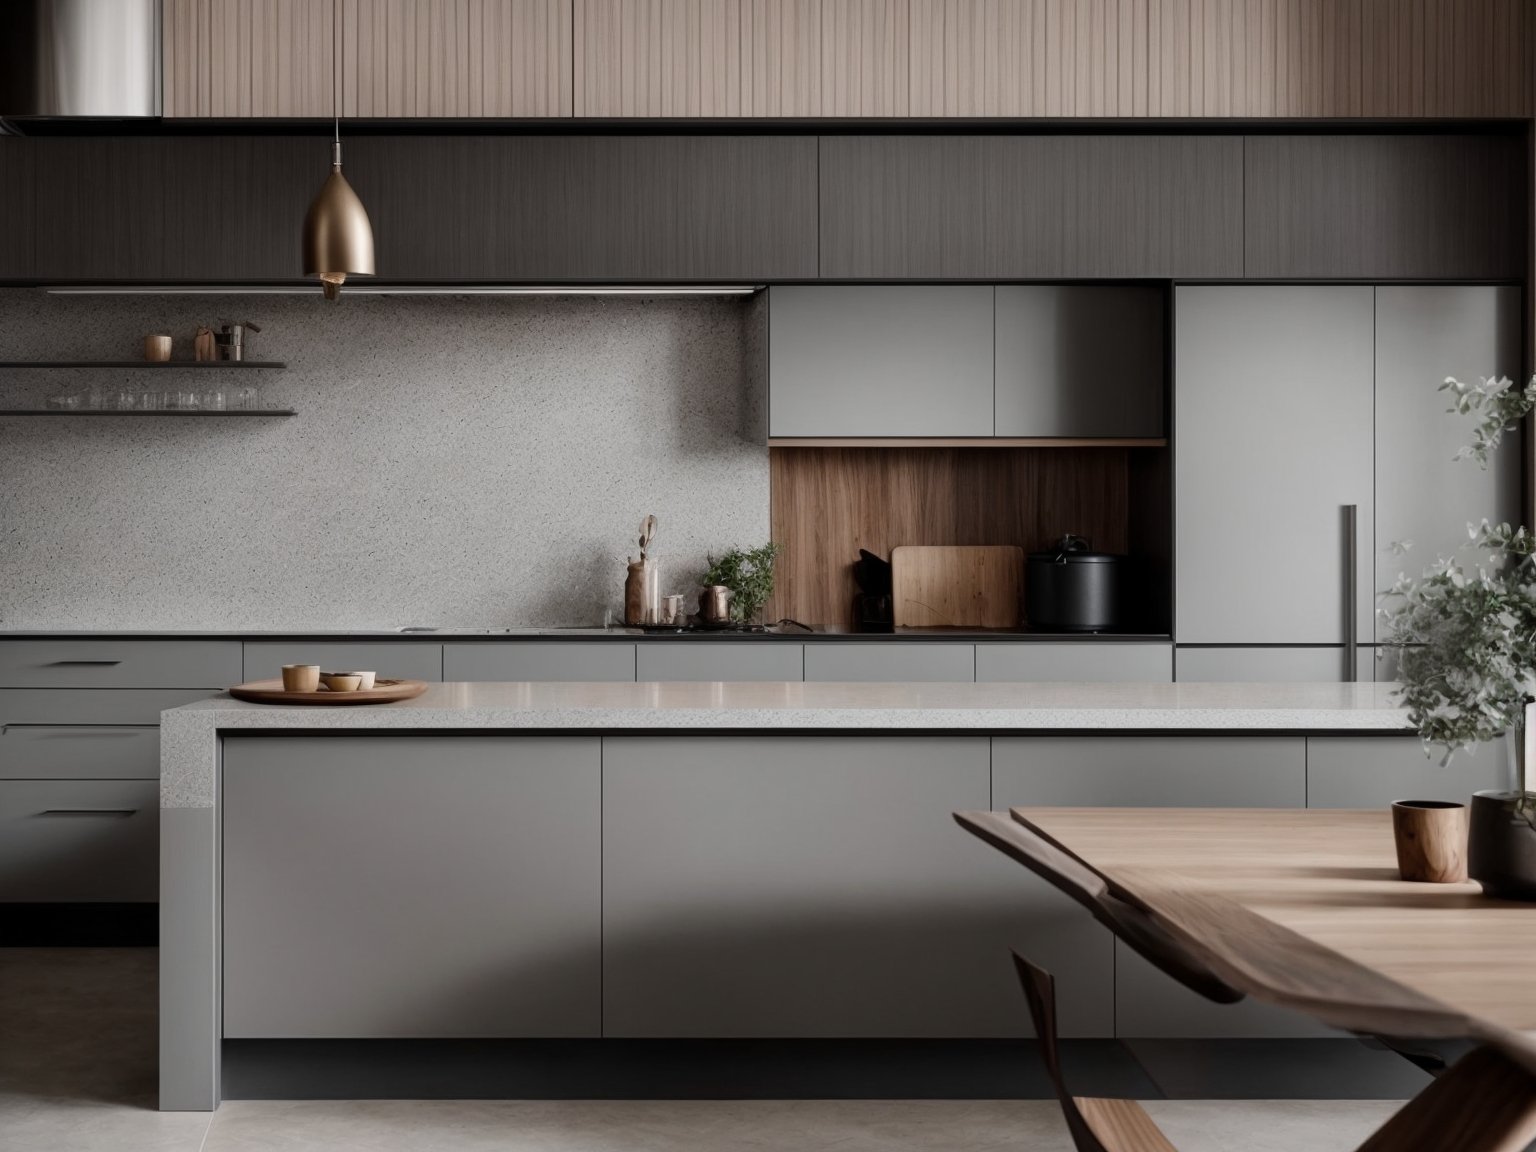 Light grey kitchen cabinets with a dark countertop, creating a stylish contrast